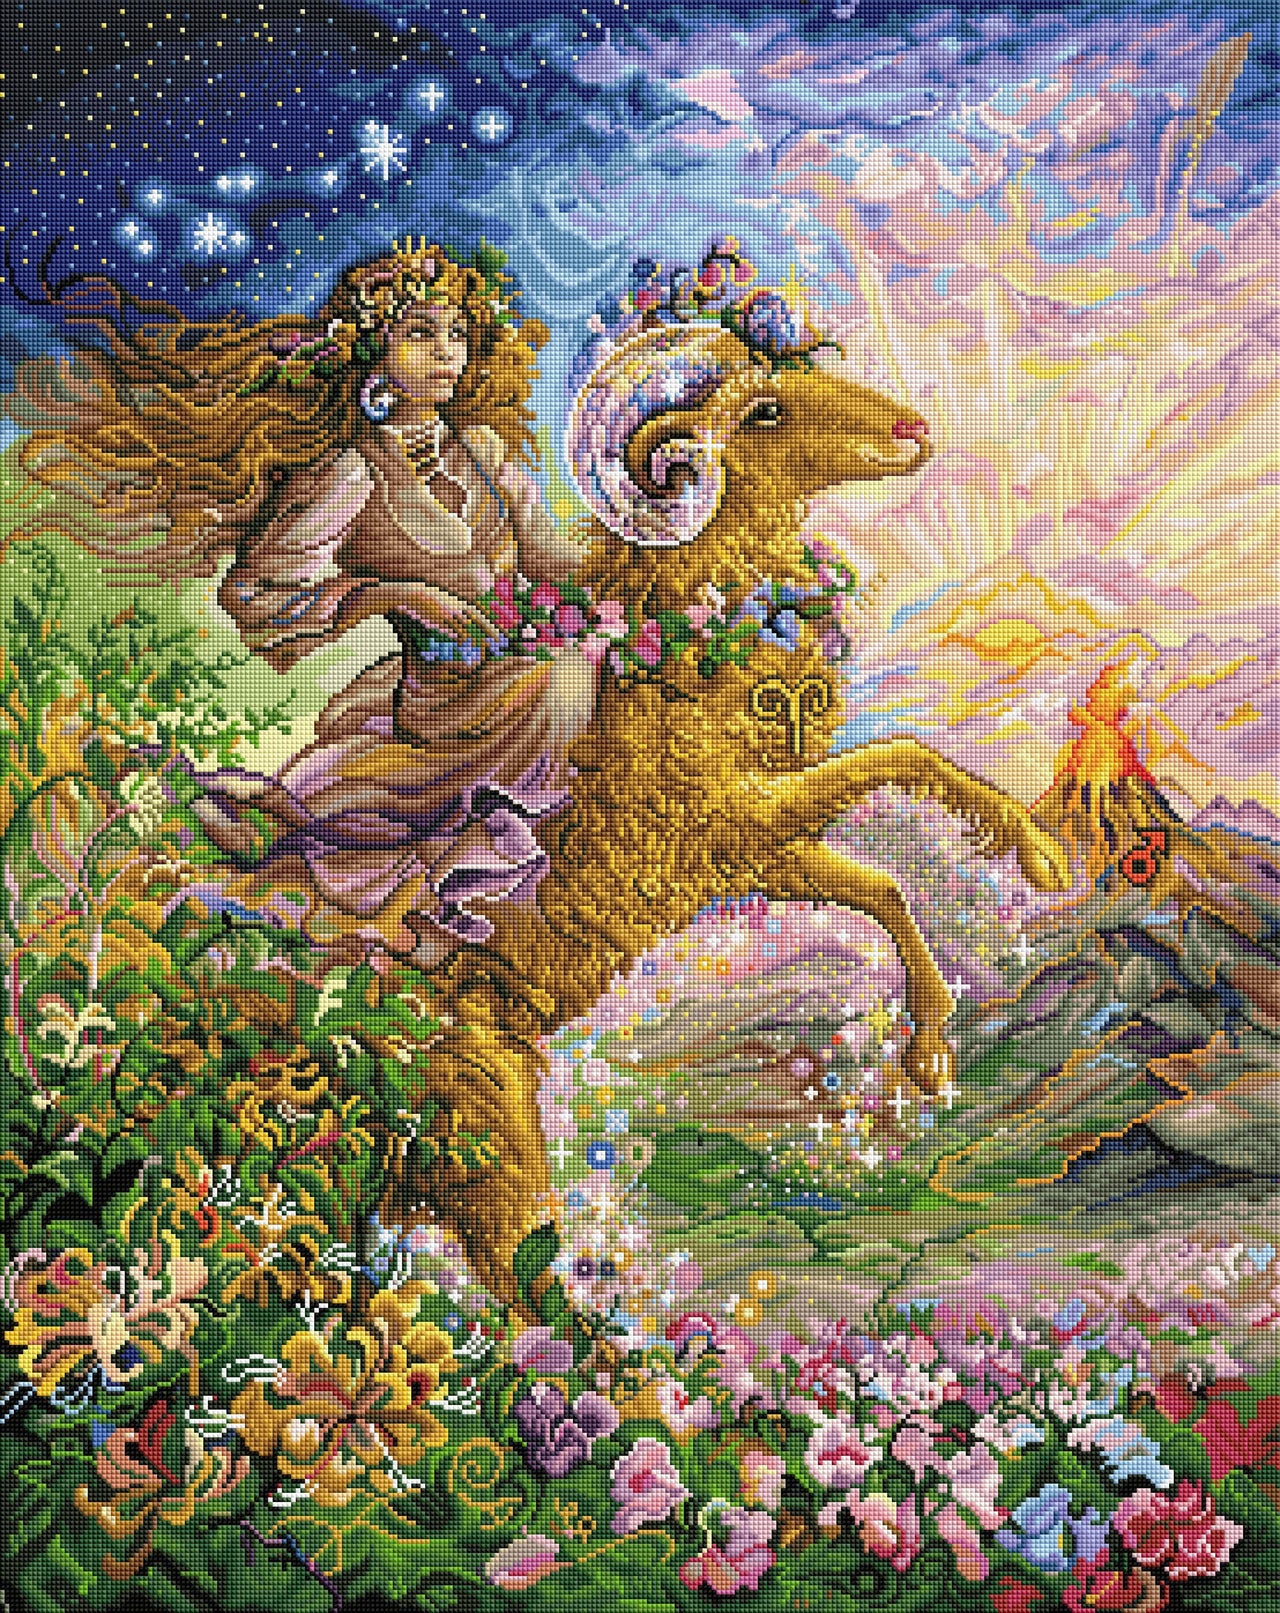 Diamond Painting Aries 27.6" x 34.7″ (70cm x 88cm) / Square with 63 Colors including 5 ABs / 96,673